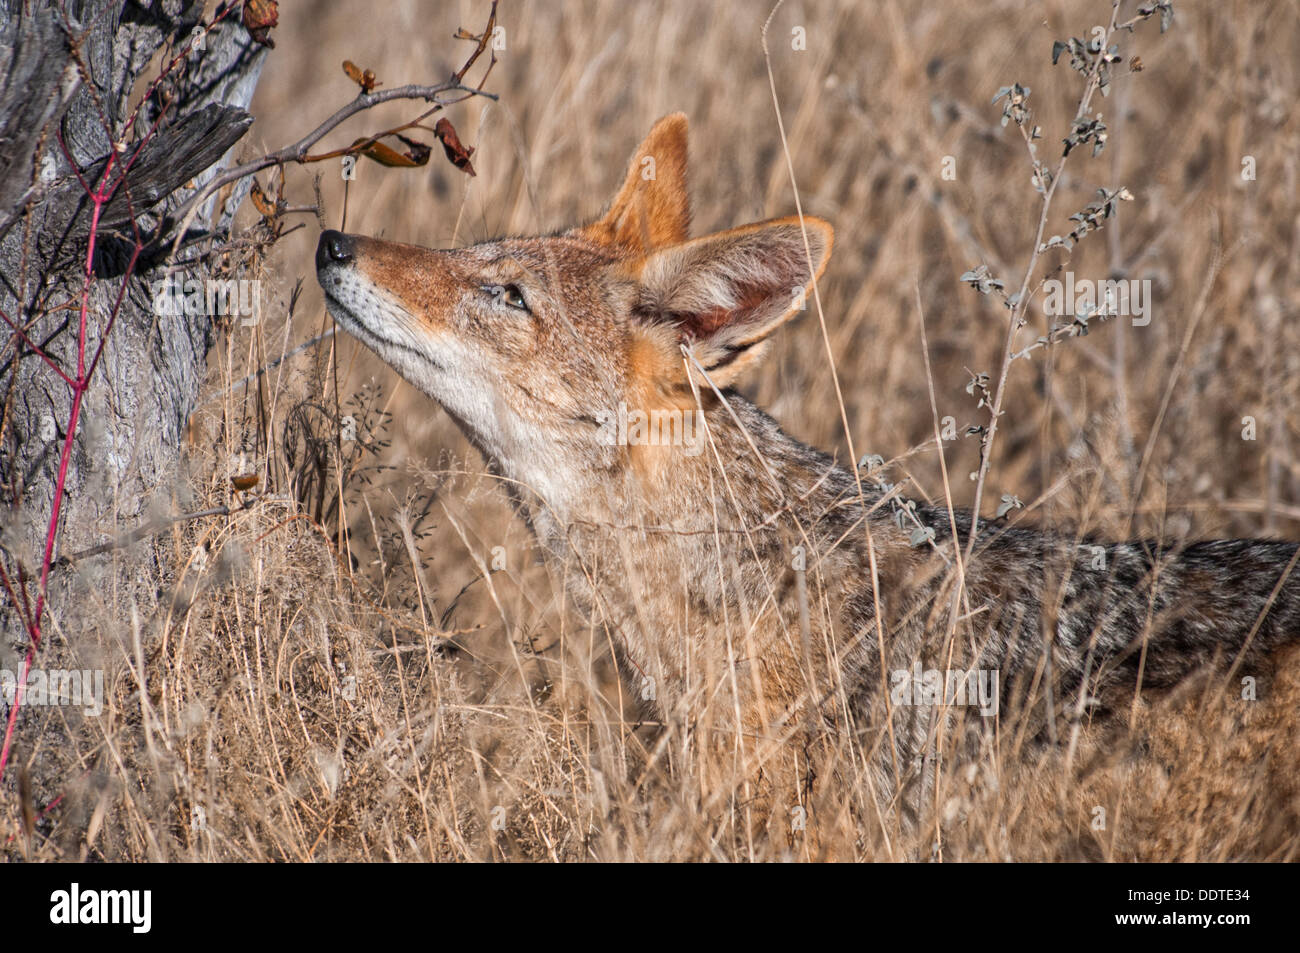 Profile of a Black-backed jackal, Canis mesomelas, sniffing a scent mark on a tree marking territory in Etosha, Namibia, Africa Stock Photo